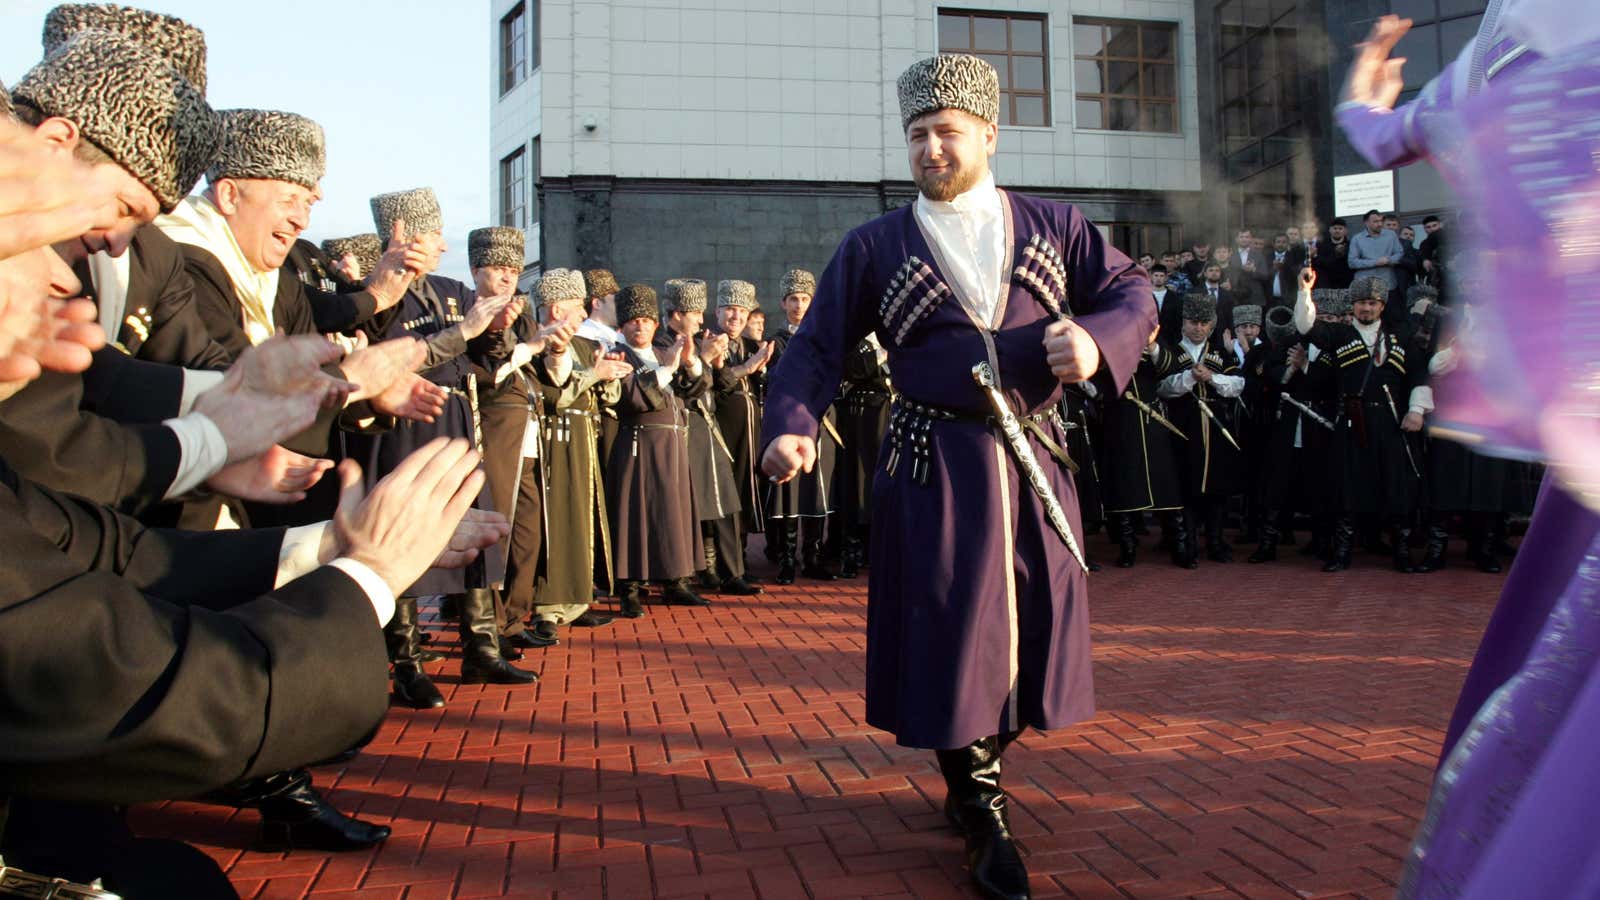 Kadyrov is a colorful character.